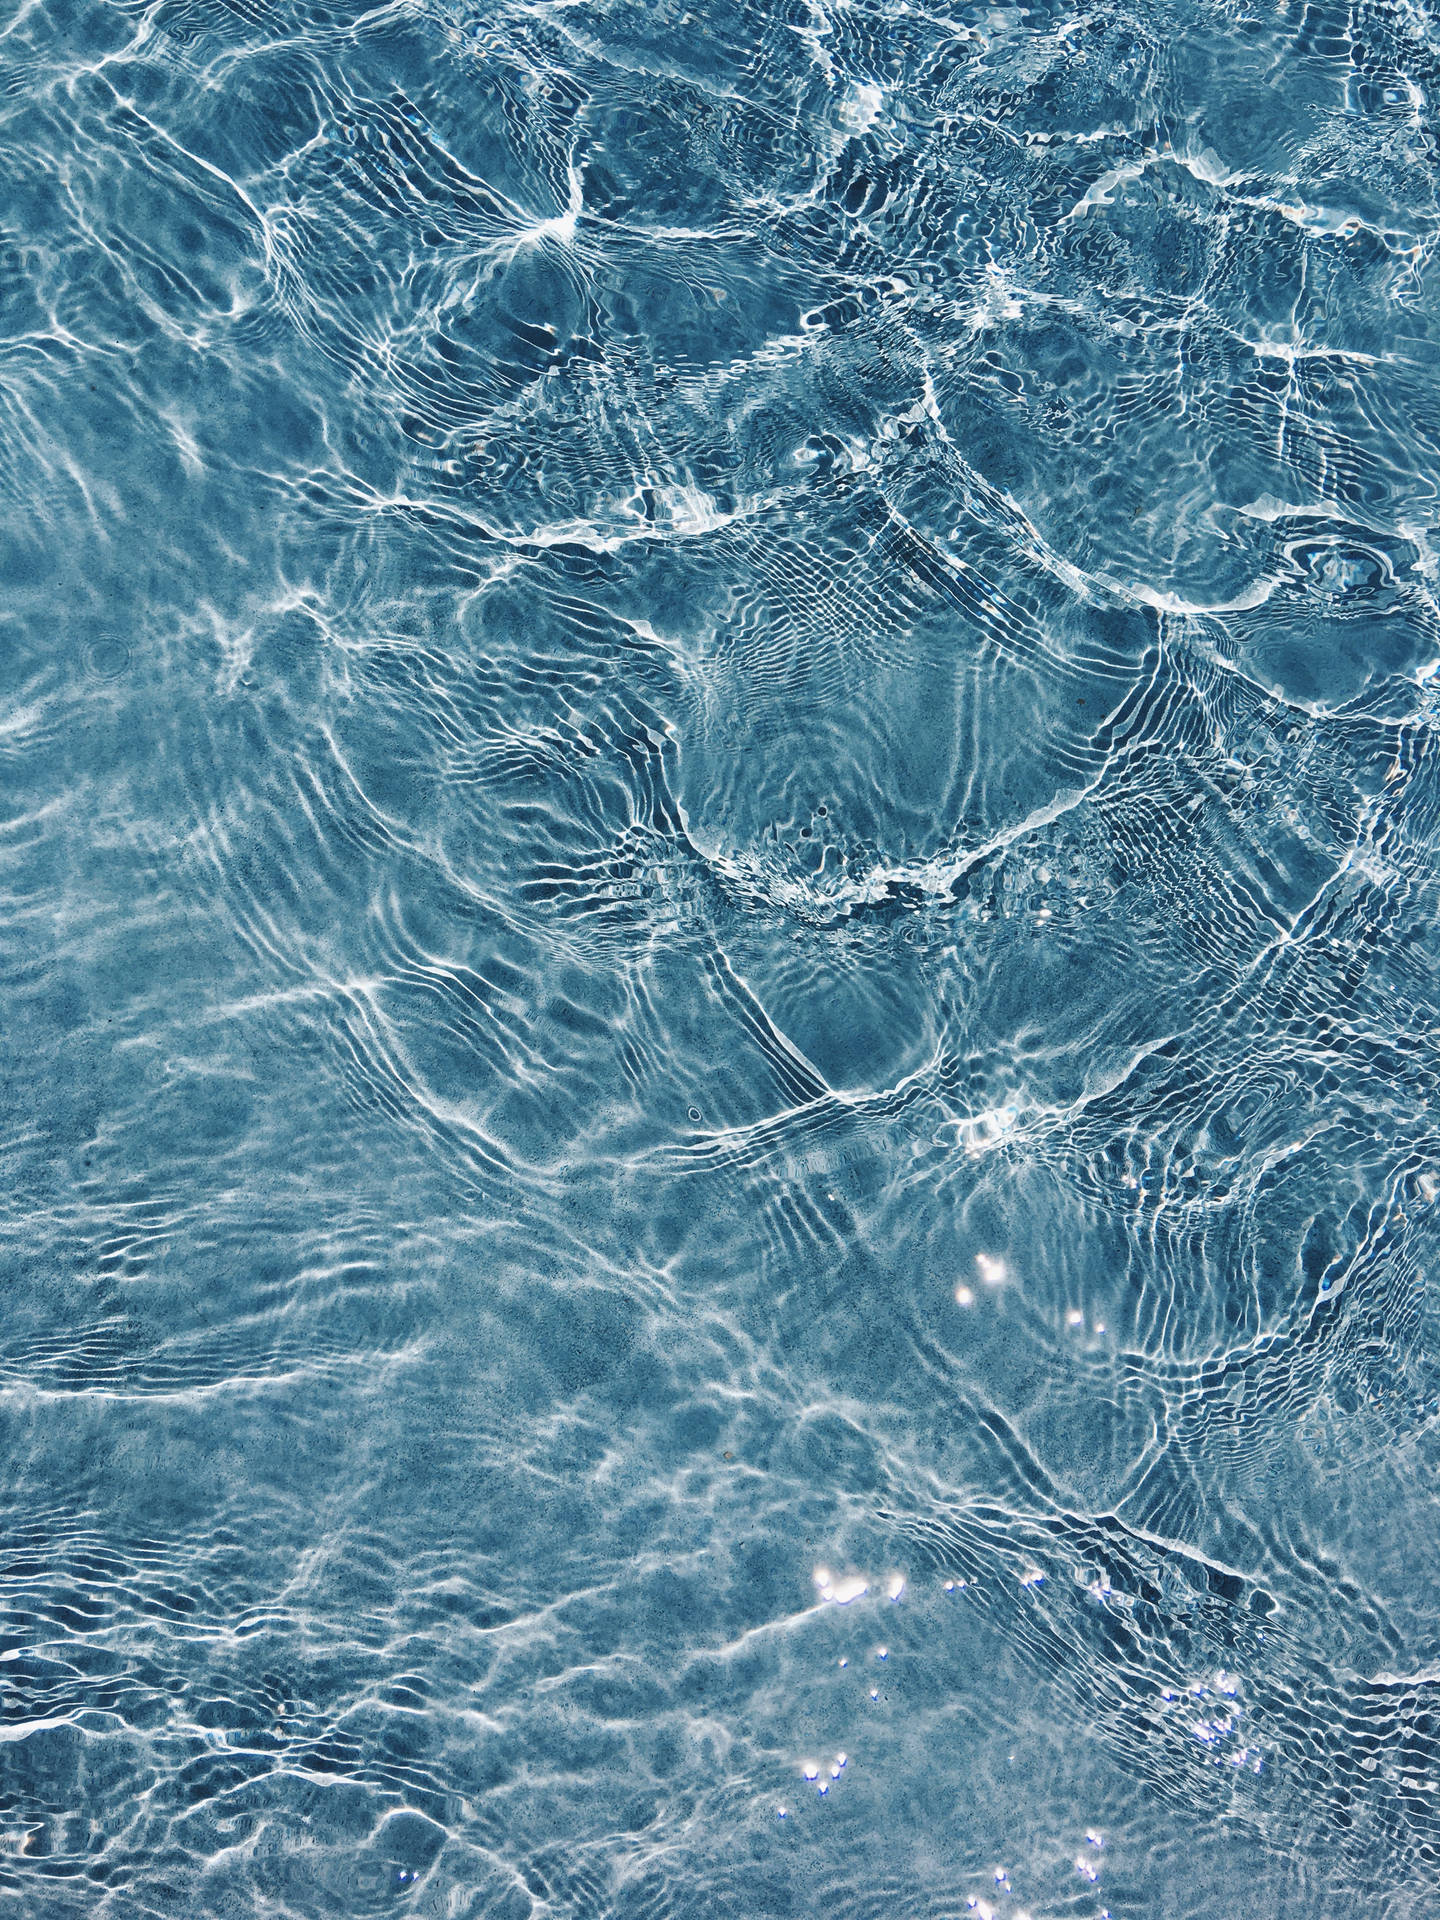 Discover inner contemplation and serenity in a rippling pool of water. Wallpaper